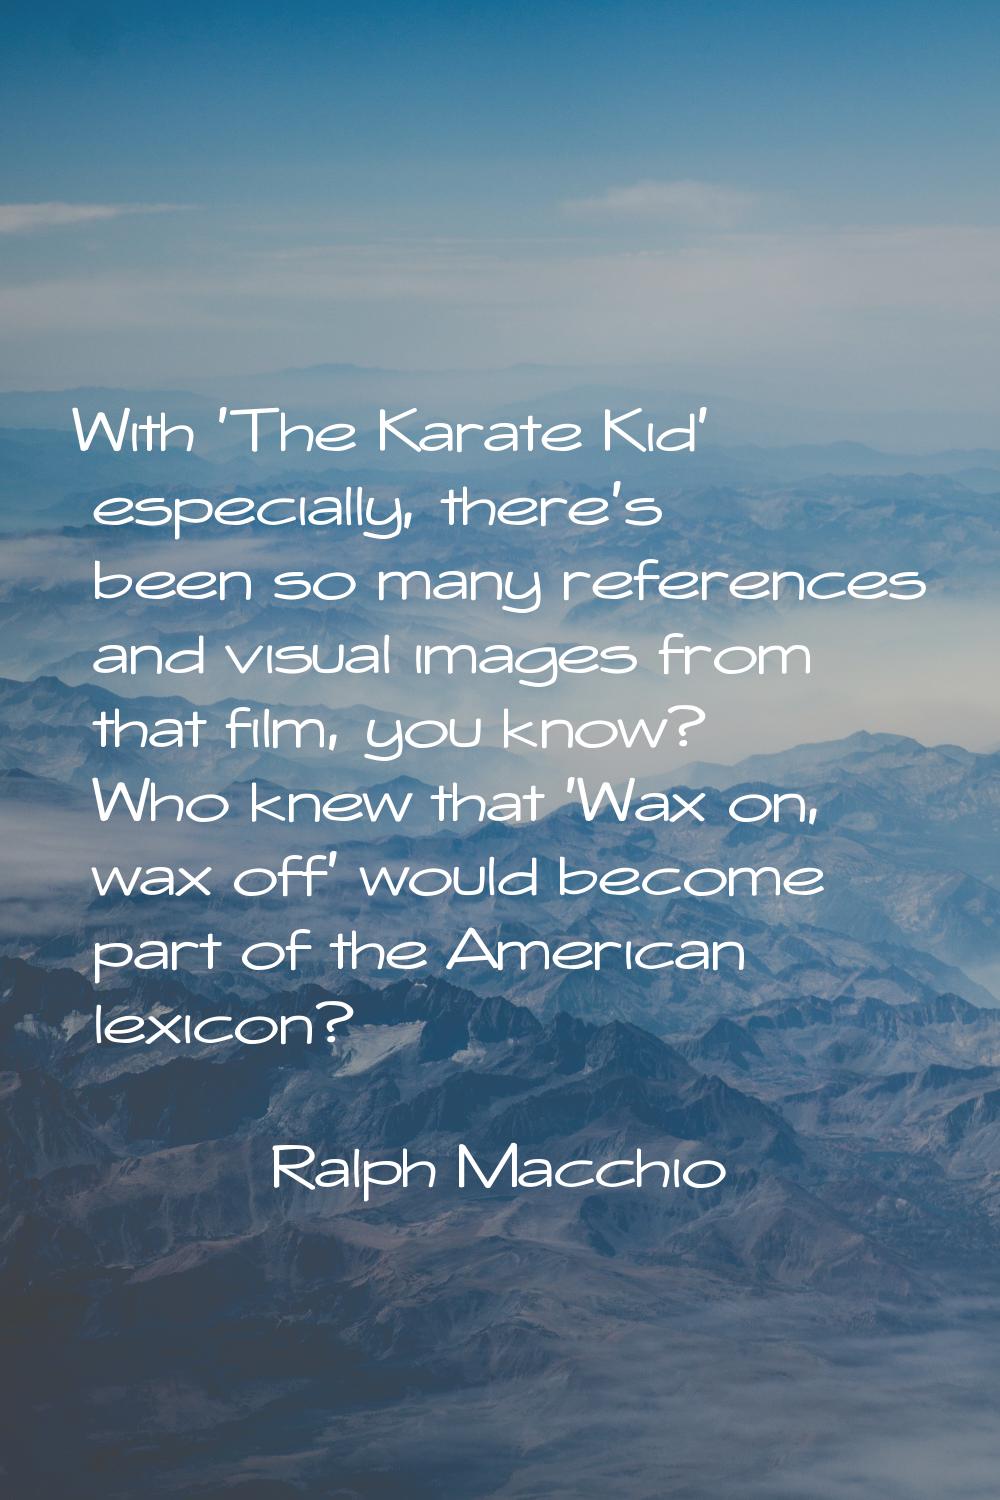 With 'The Karate Kid' especially, there's been so many references and visual images from that film,